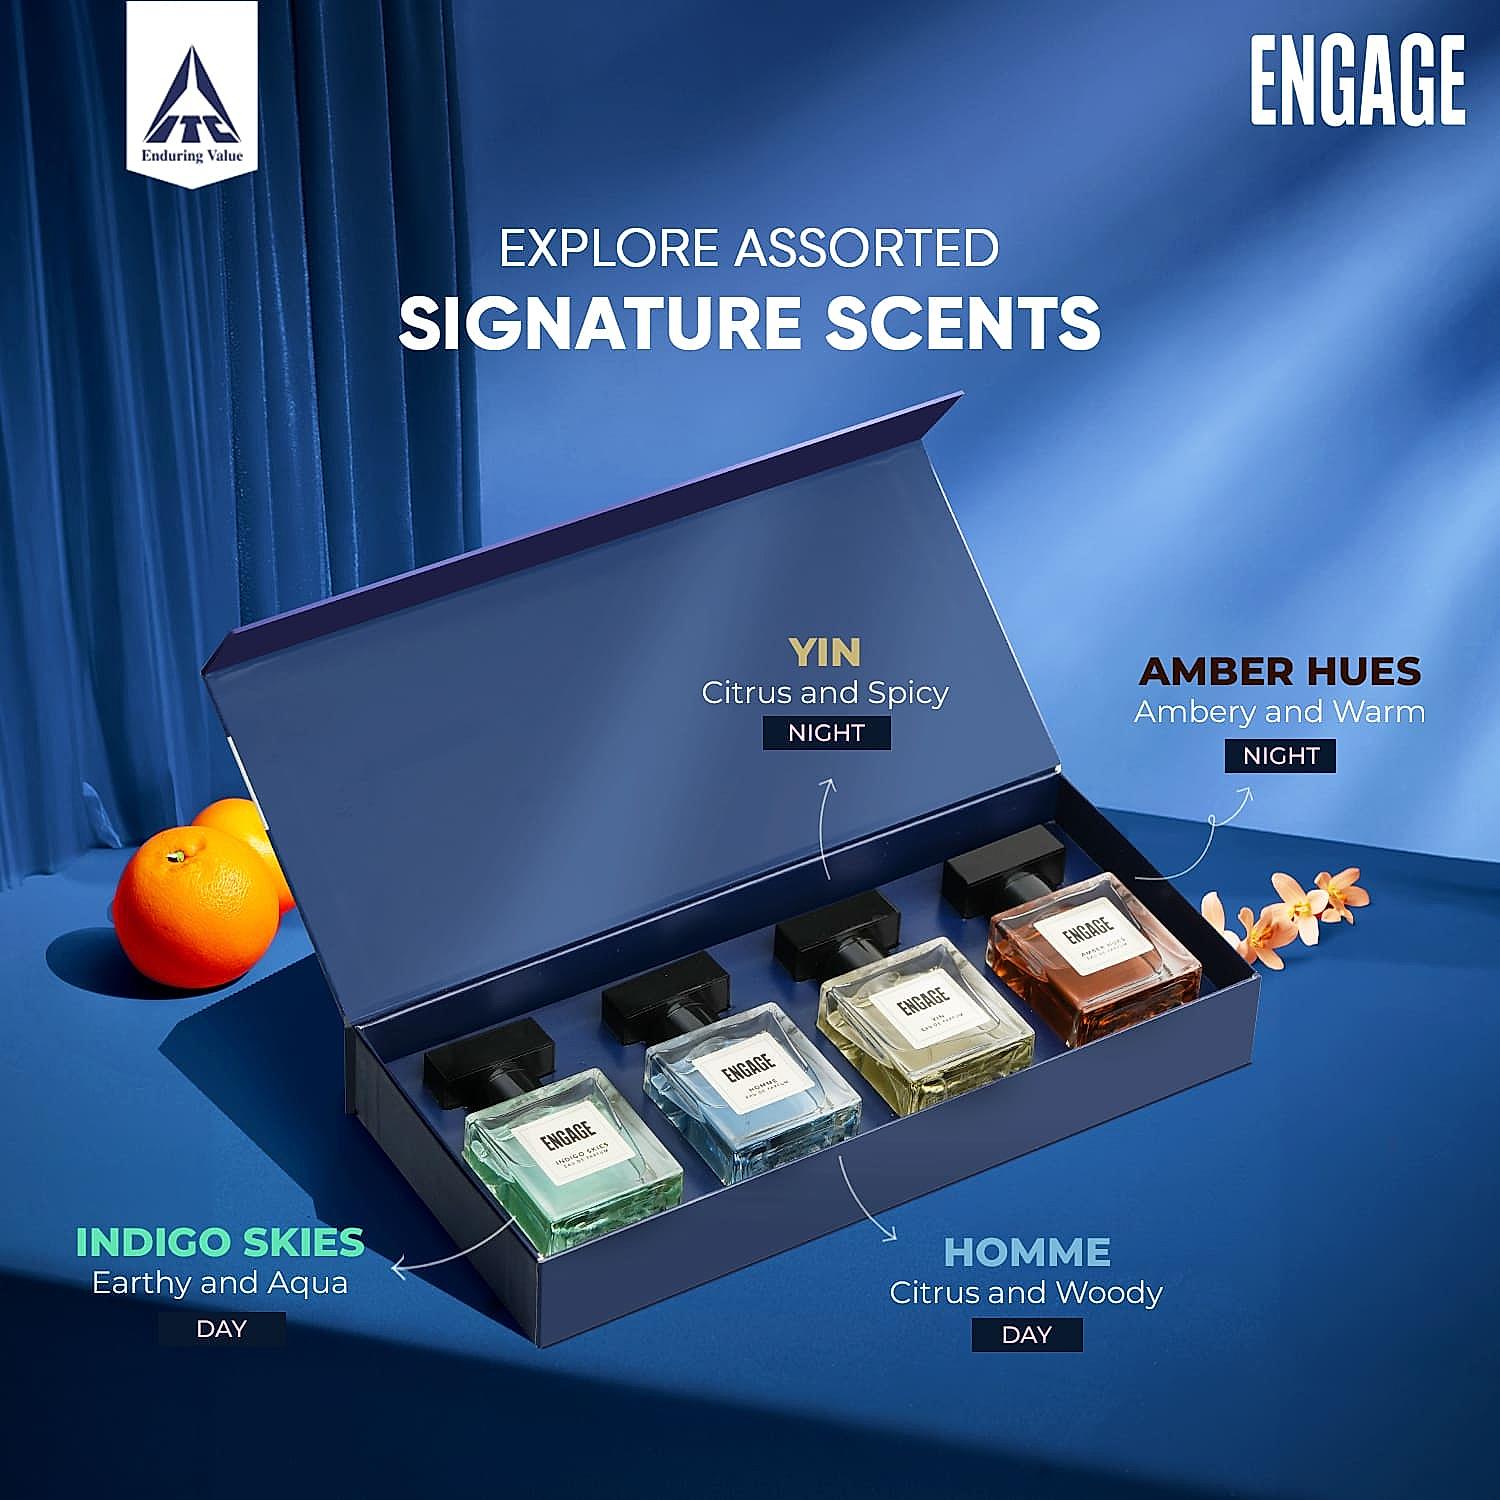 Engage Luxury Perfume Gift Pack for Men, Travel Sized, Assorted Pack